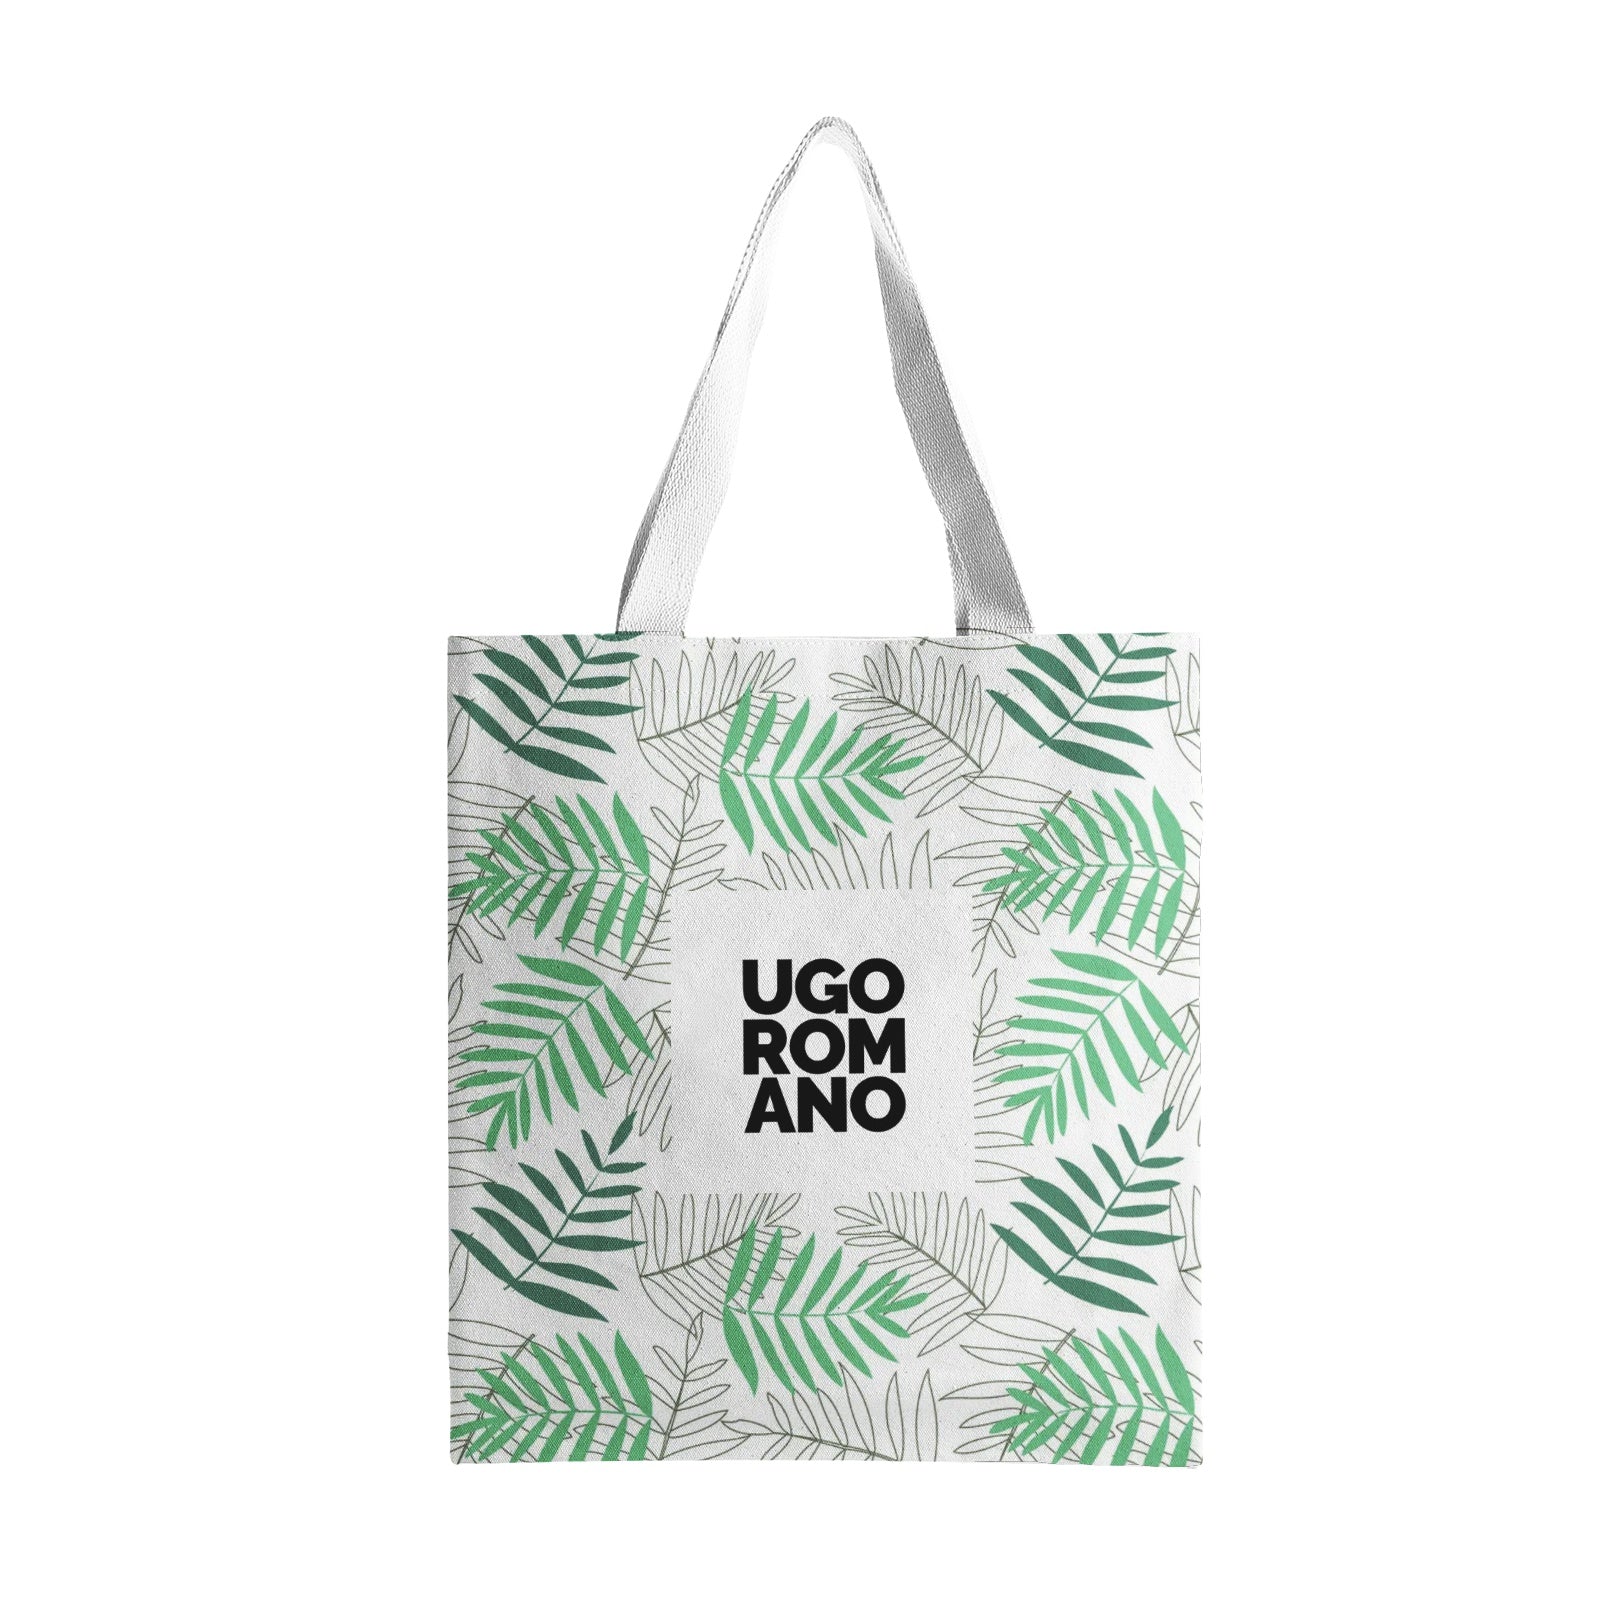 Heavy Duty and Strong Natural Cotton Canvas Tote Bag - UGO ROMANO URTB065